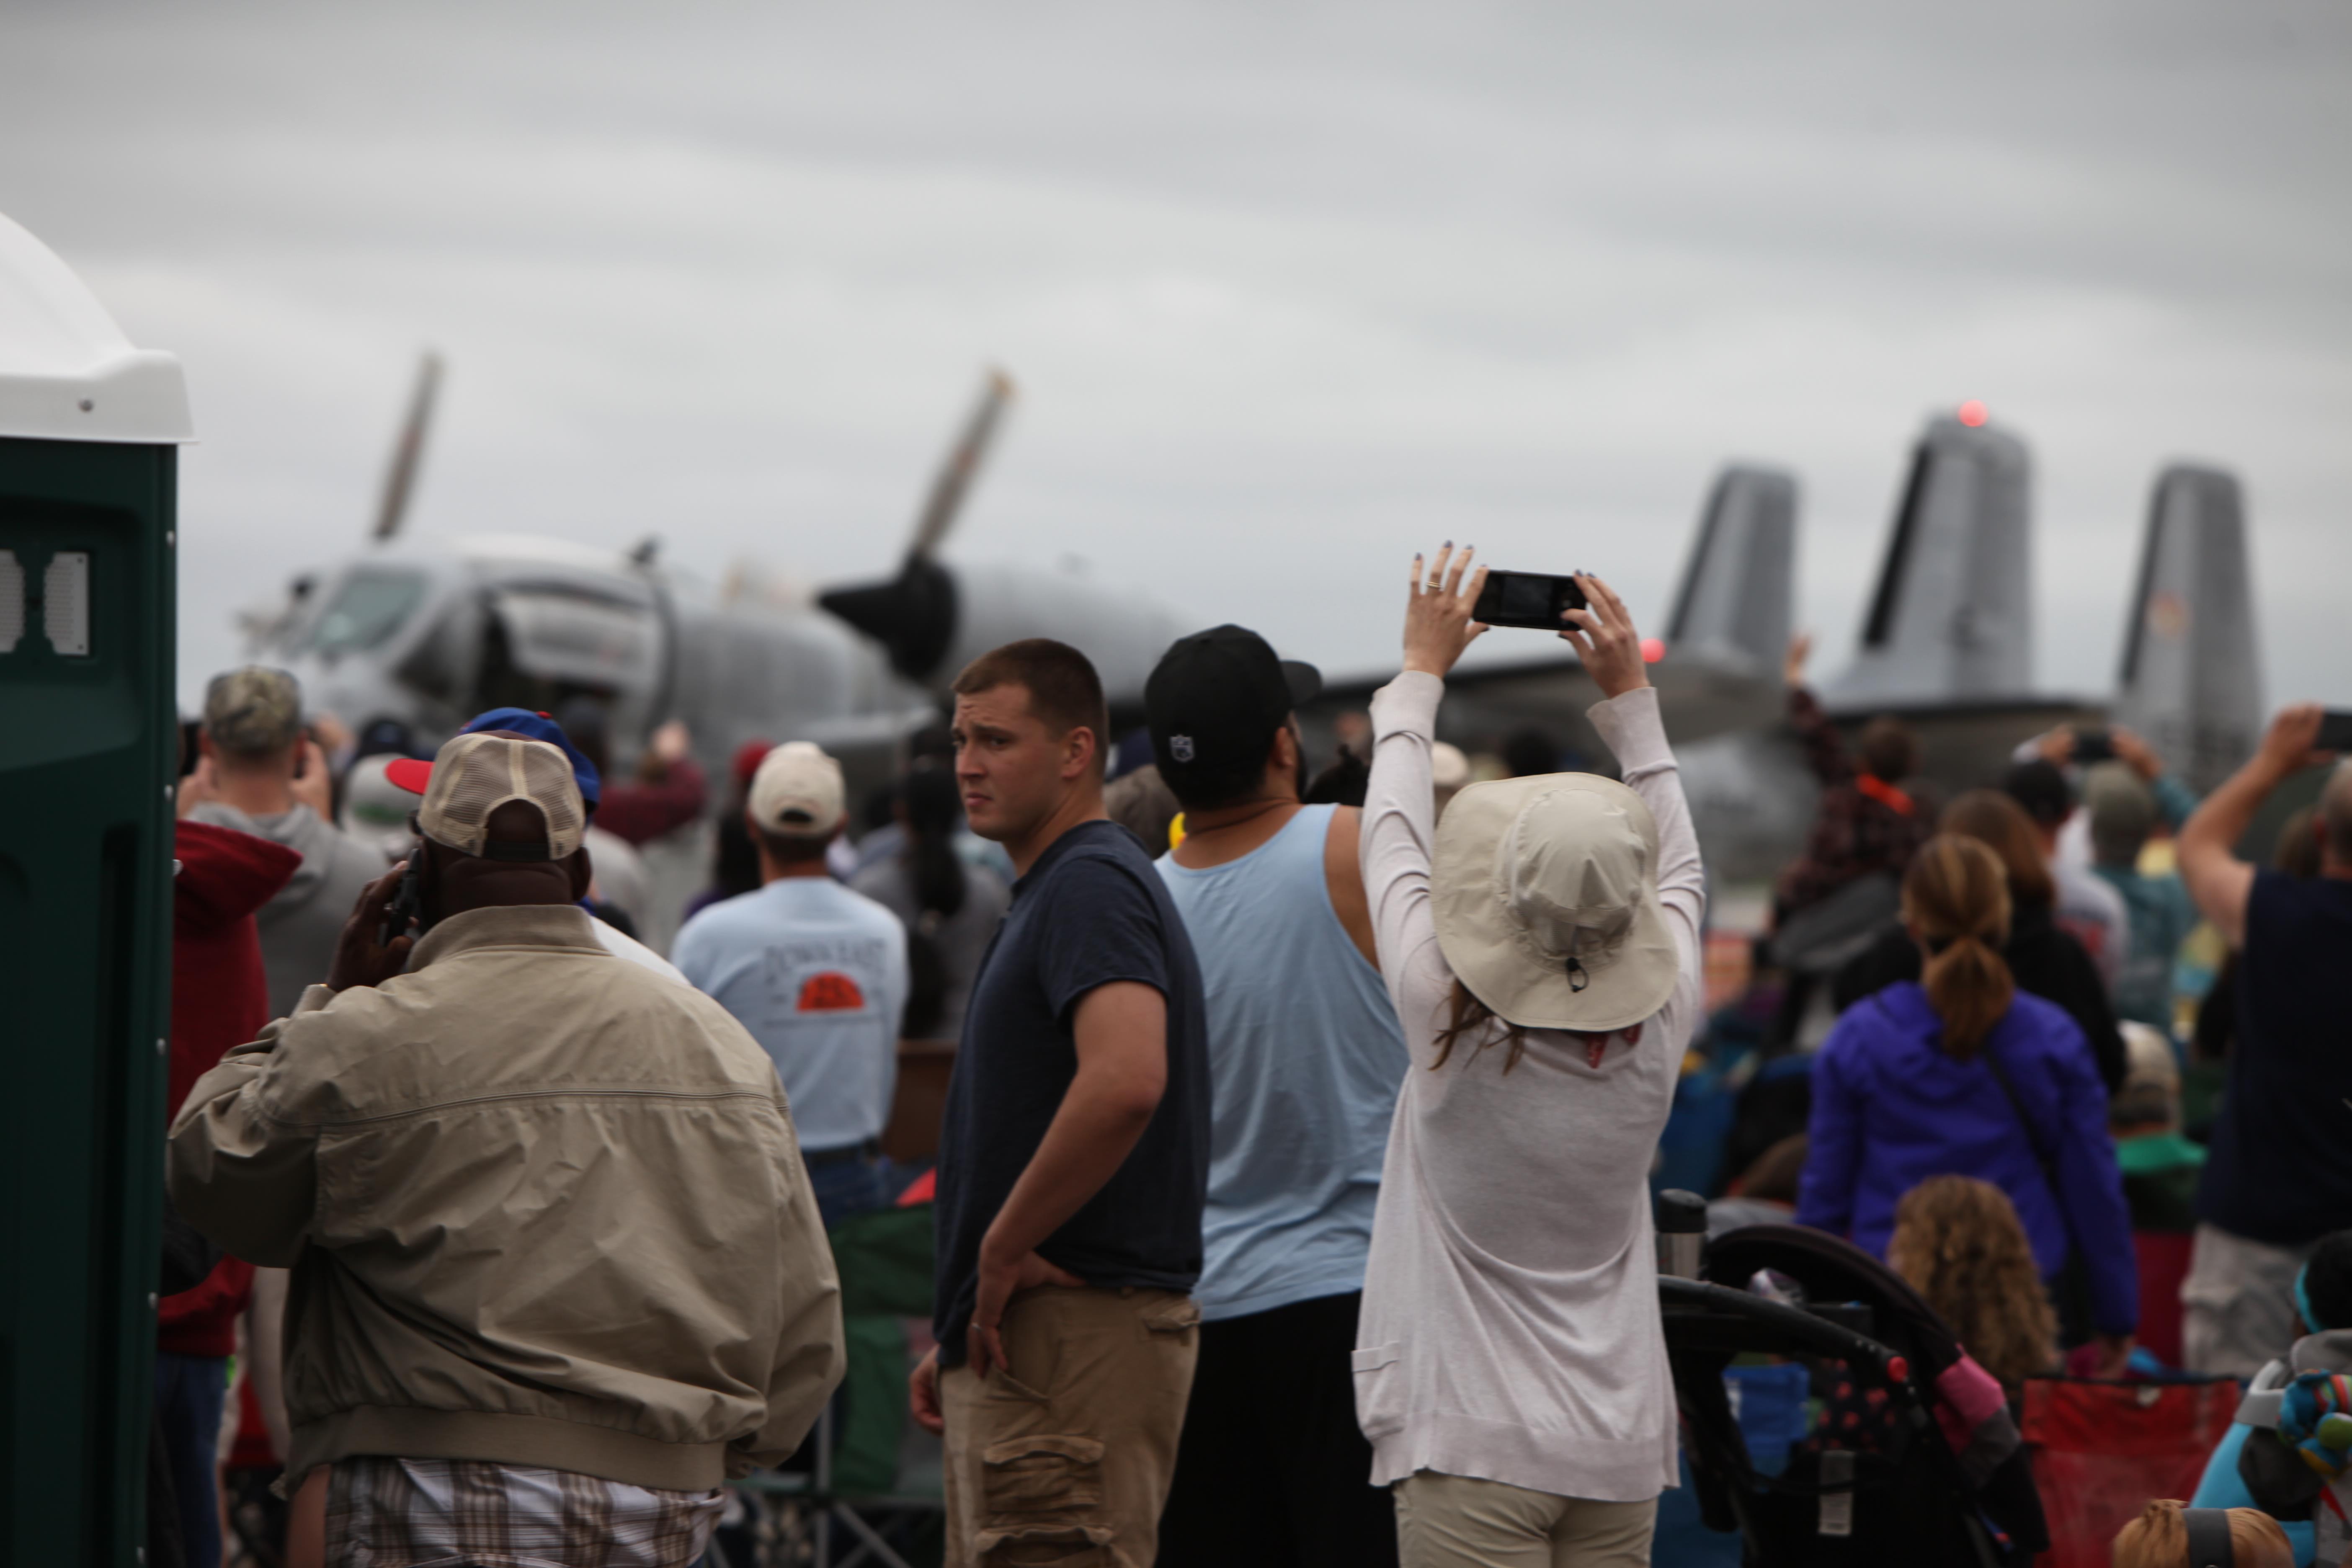 2016 MCAS Cherry Point Air Show "Celebrating 75 Years"